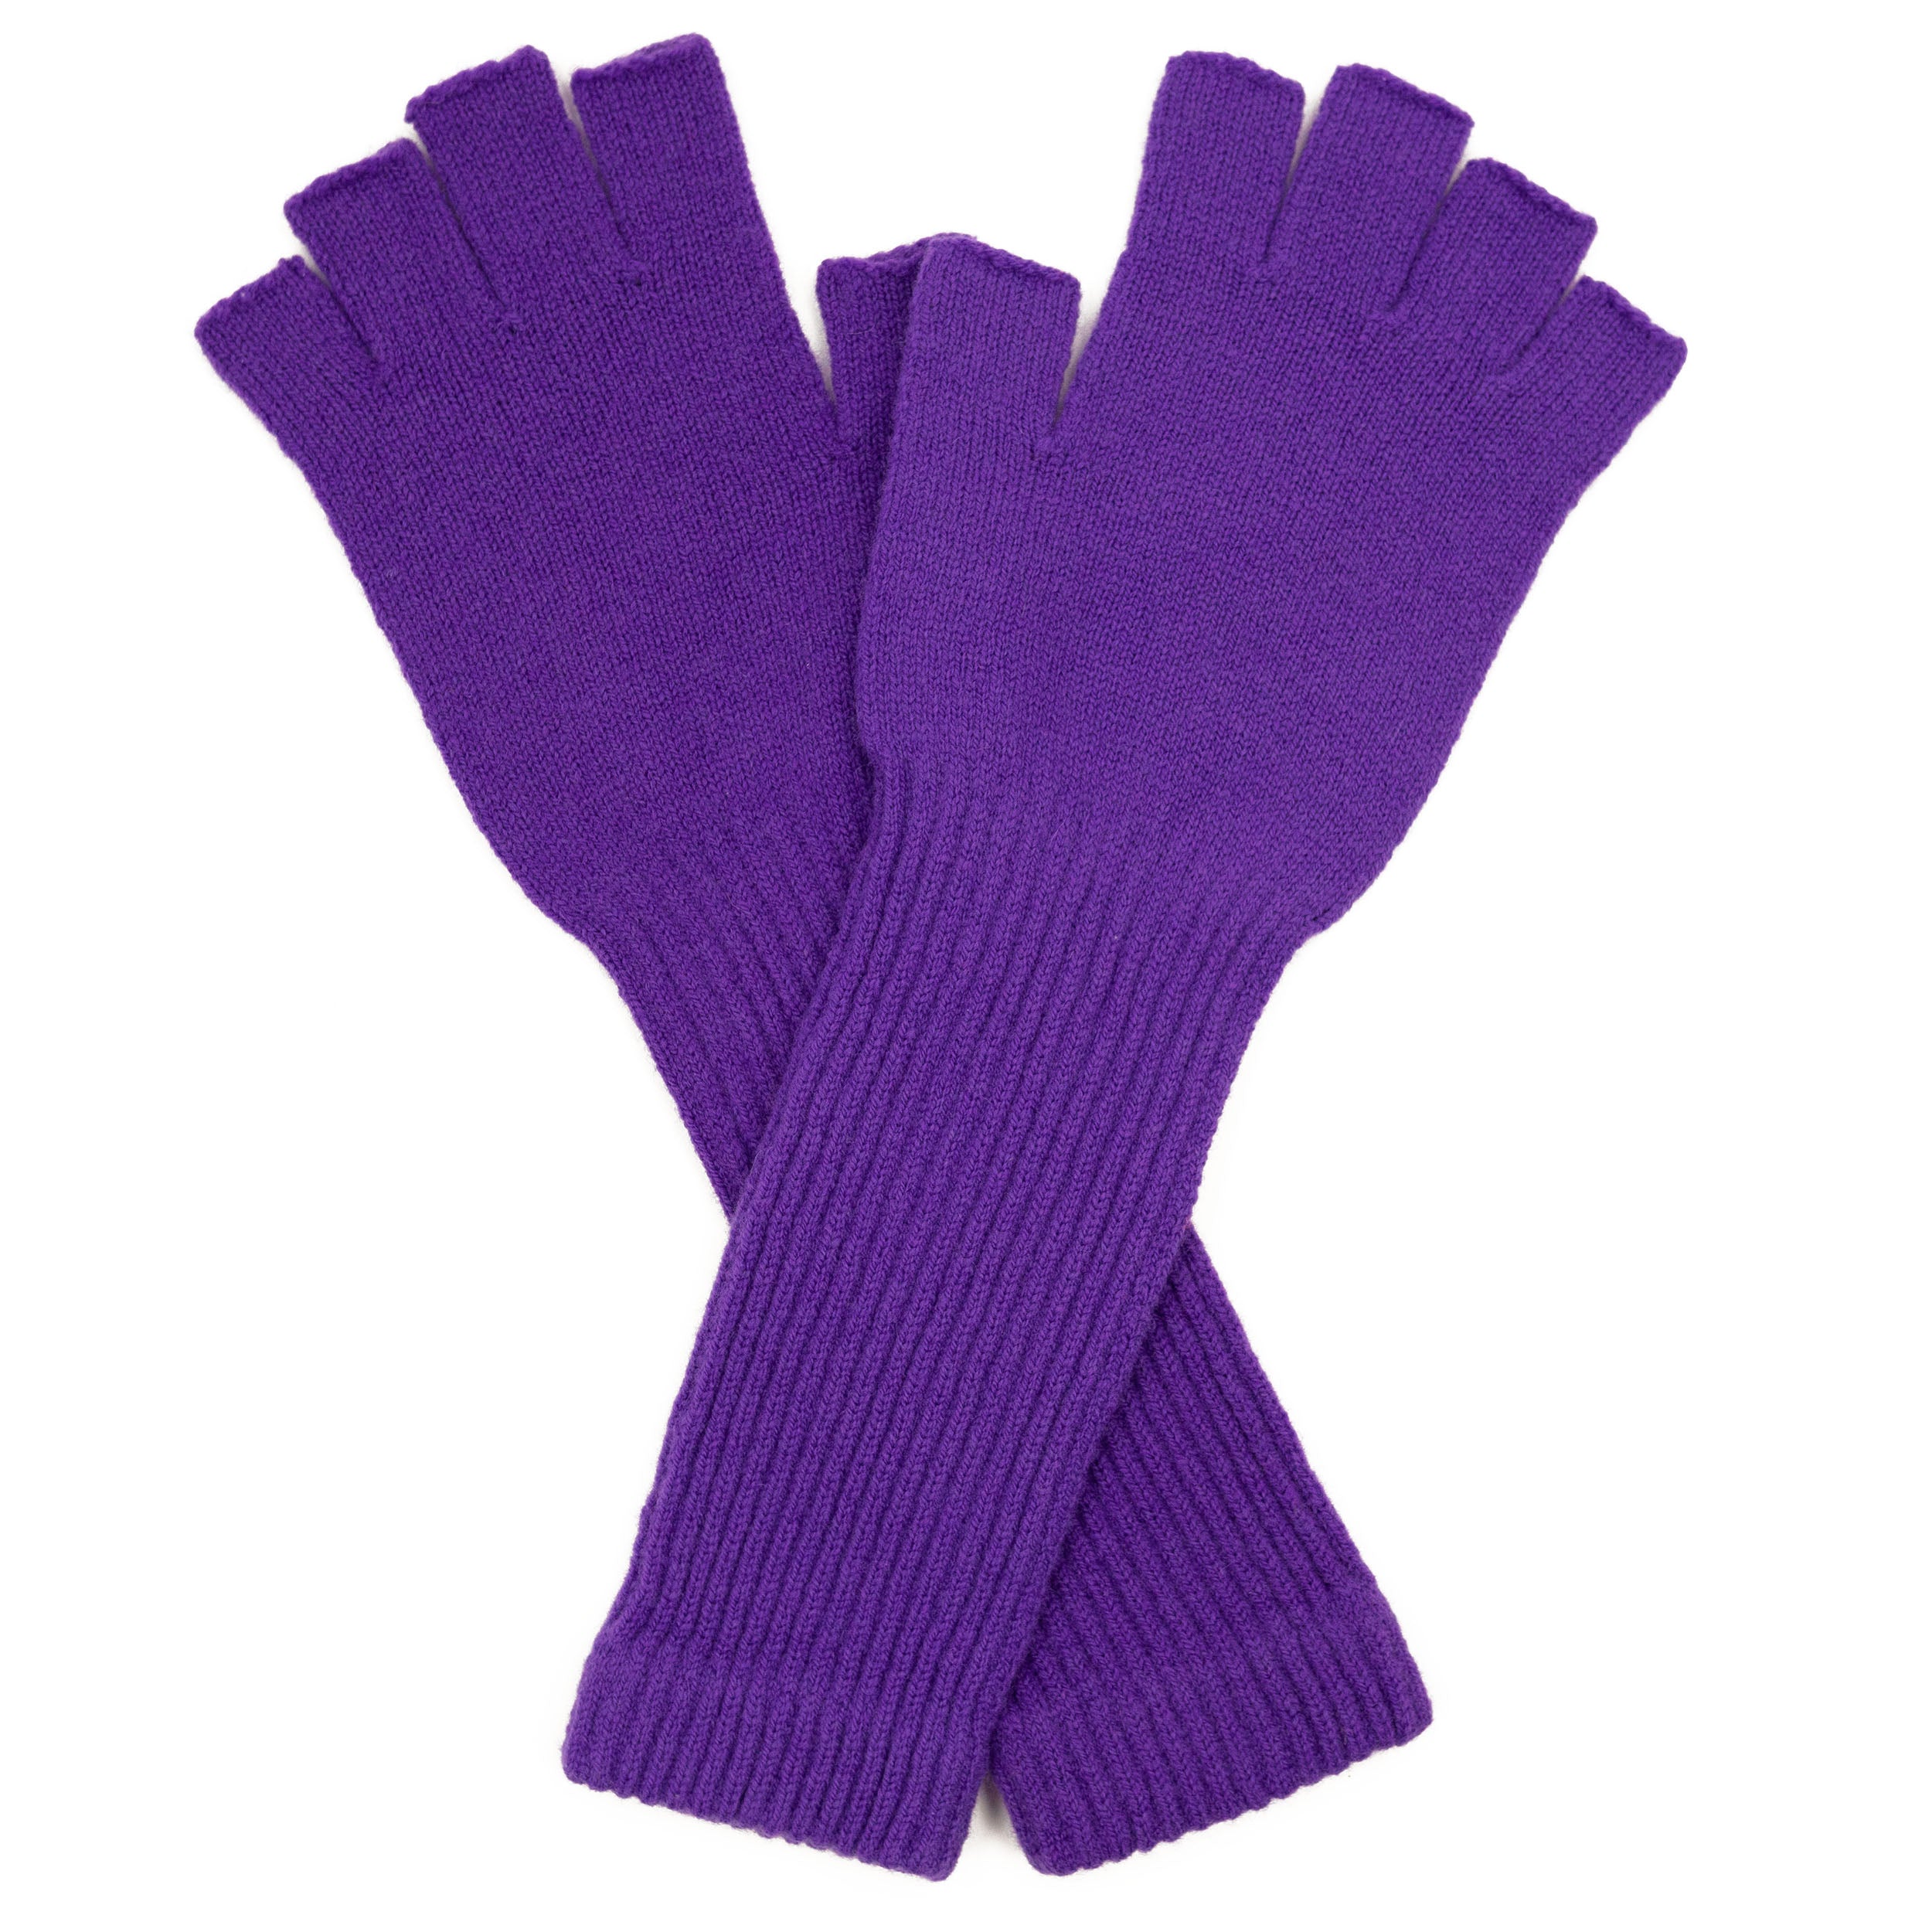 Carrier Company Gathering Glove in Grape